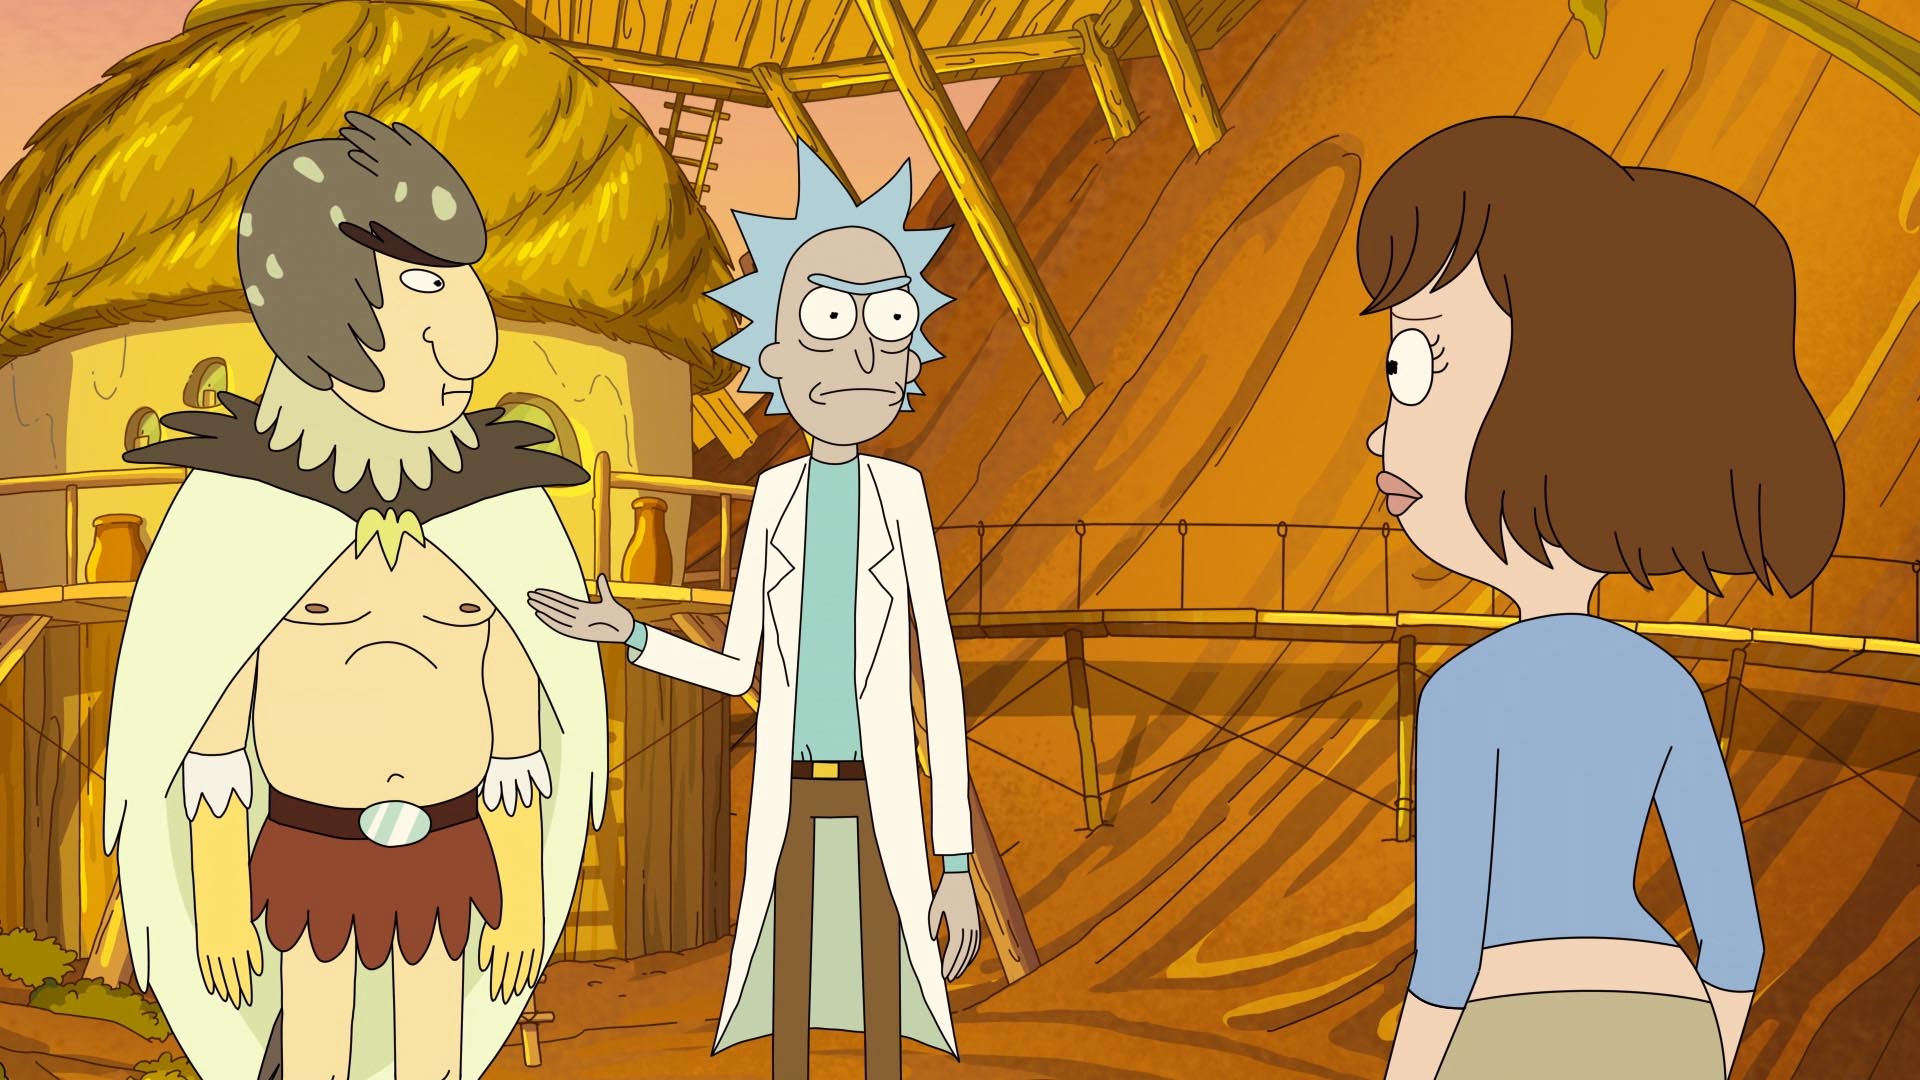 Rick and Morty Season 7 Episode 4 Streaming: How to Watch & Stream